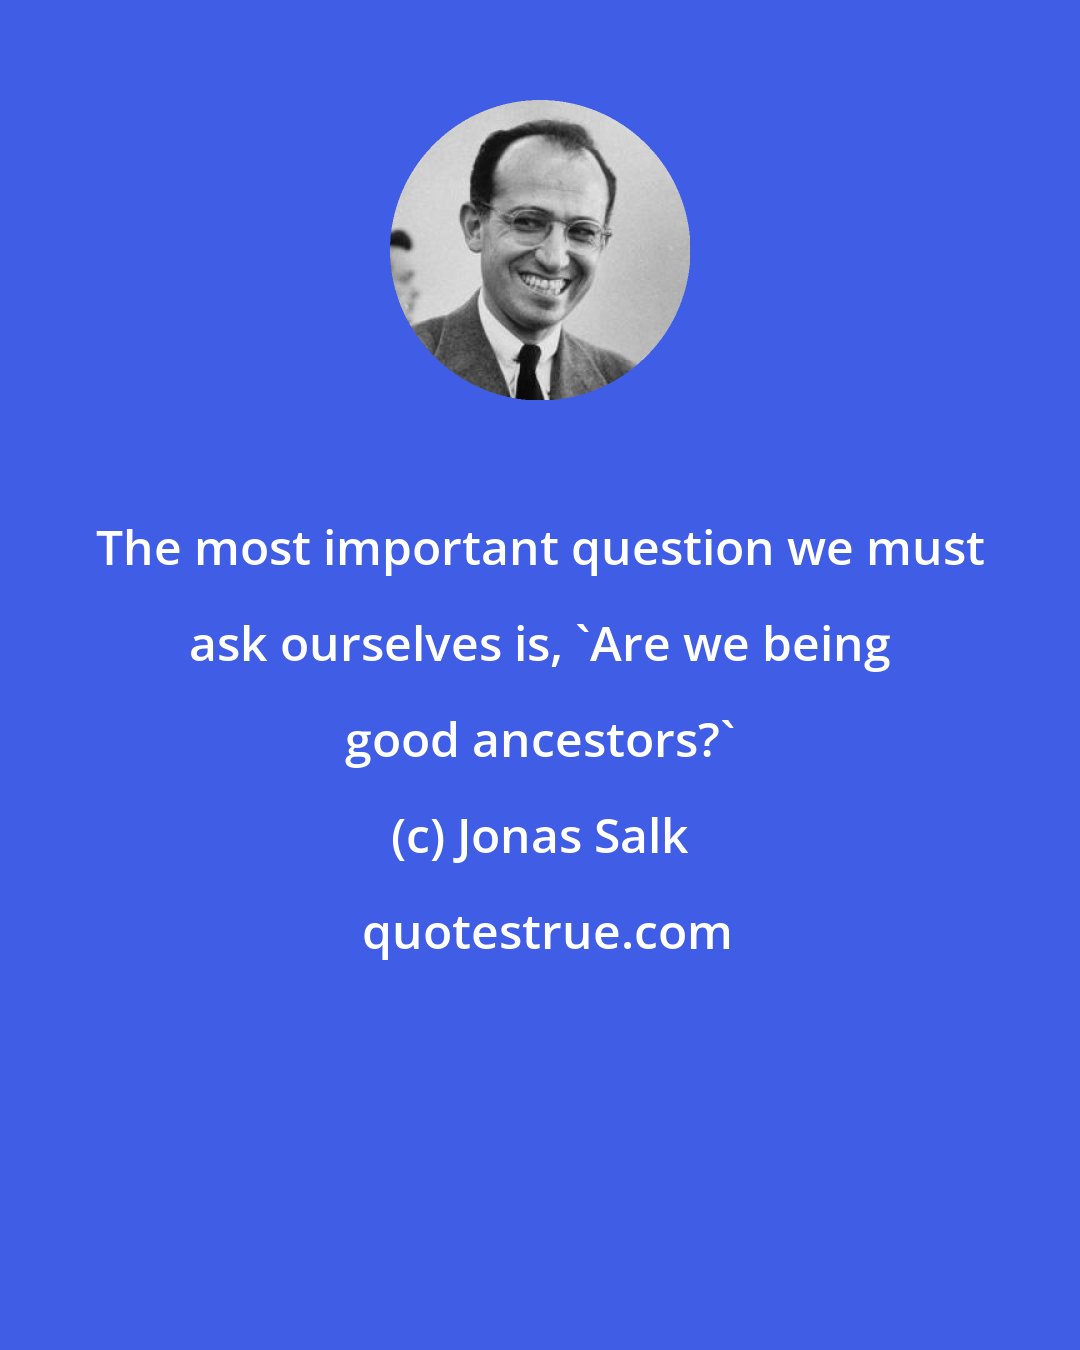 Jonas Salk: The most important question we must ask ourselves is, 'Are we being good ancestors?'